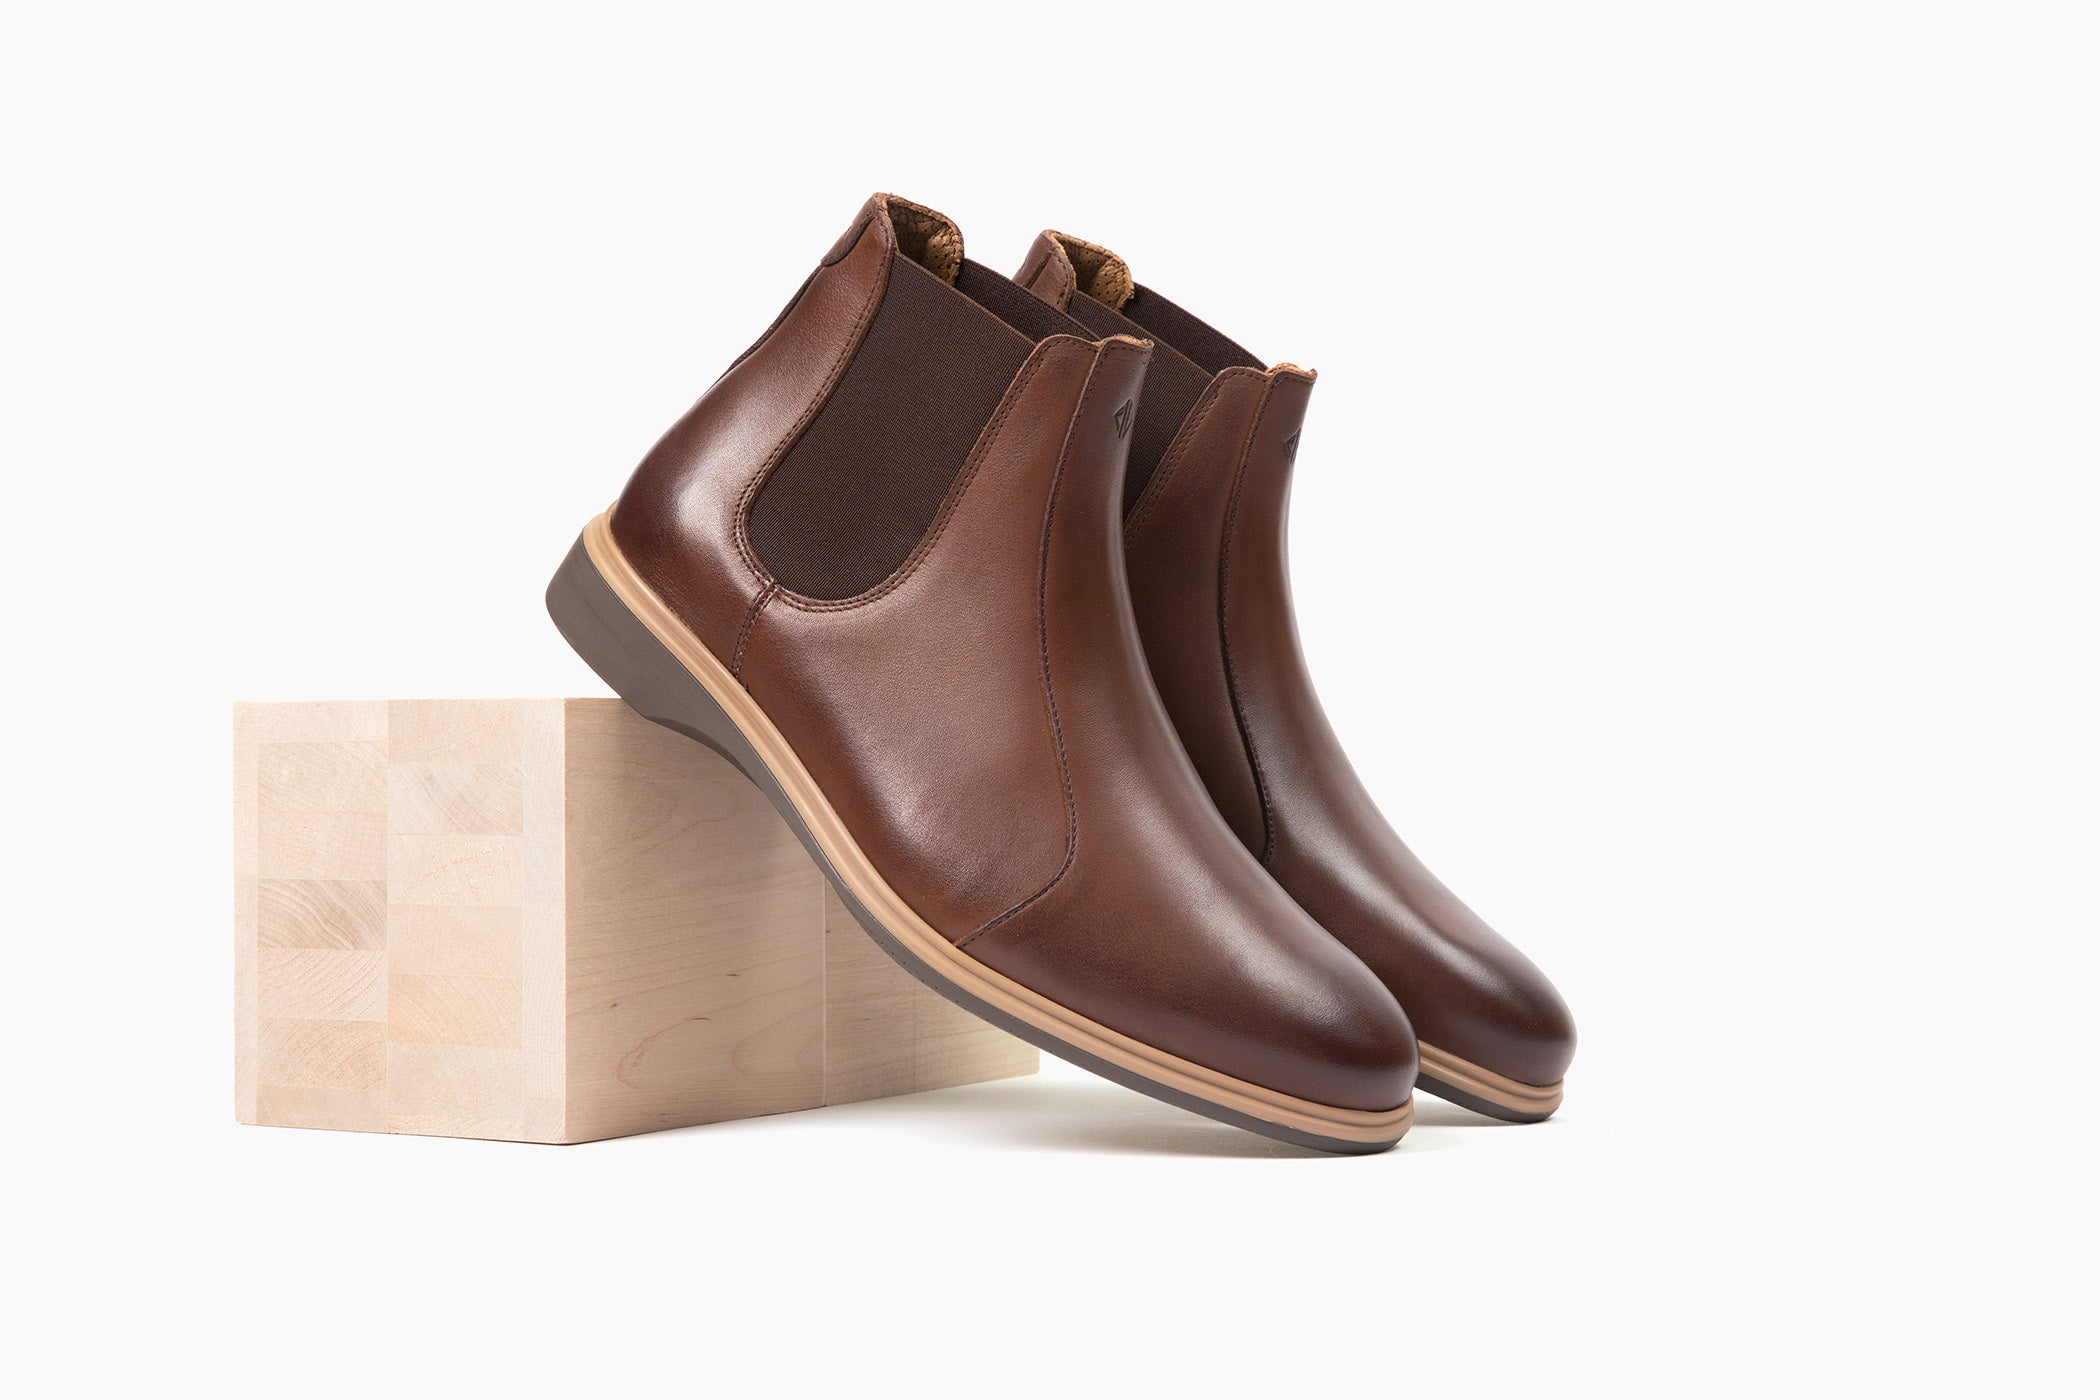 Men's leather Chelsea boots in chestnut color